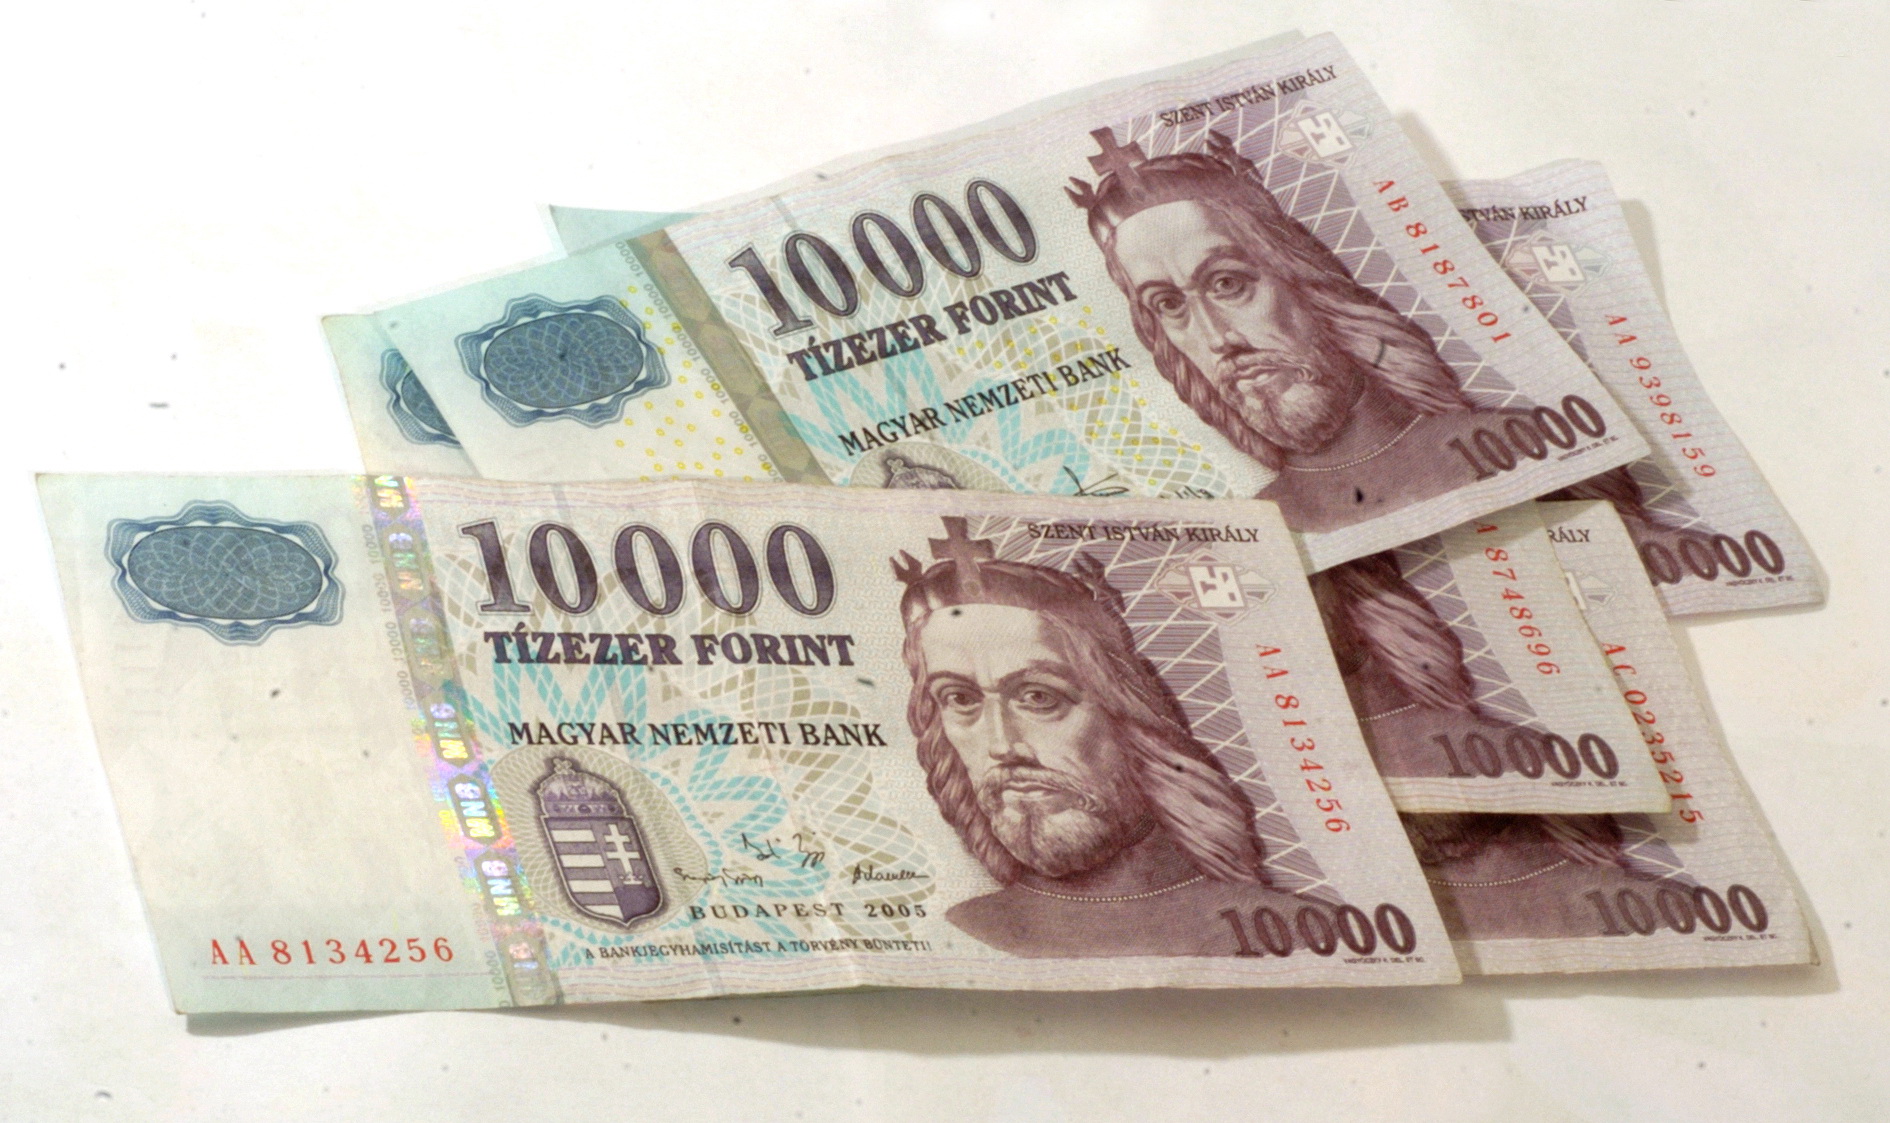 Old 10,000 Forint Notes Invalid After December